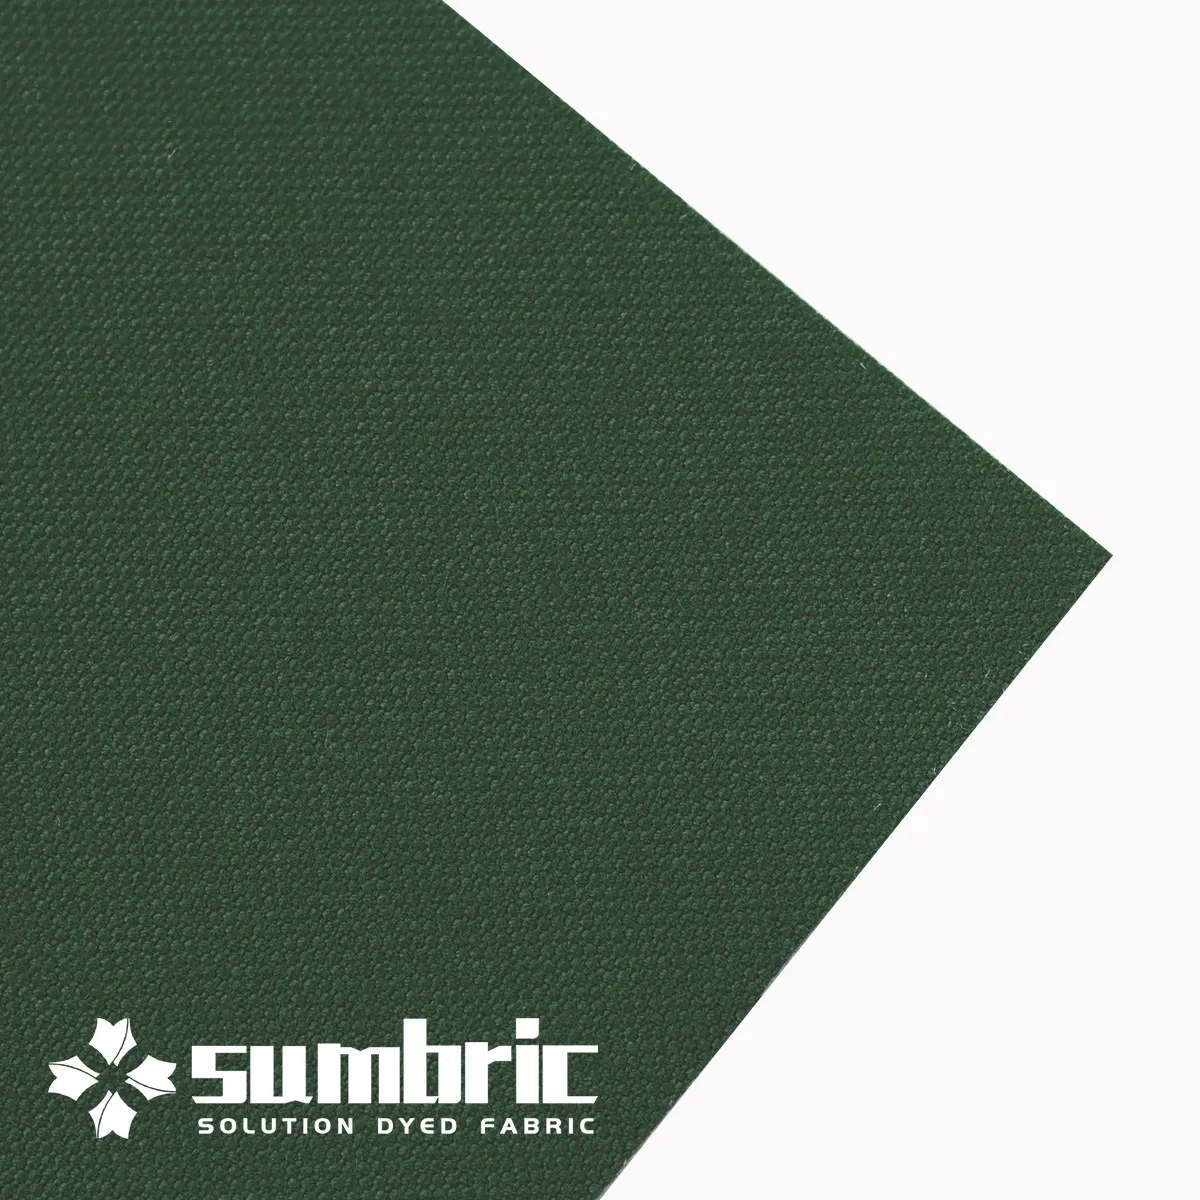 Solution dyed acrylic fabric for outdoor marine Umbrella Awning DRAK GREEN quality canvas